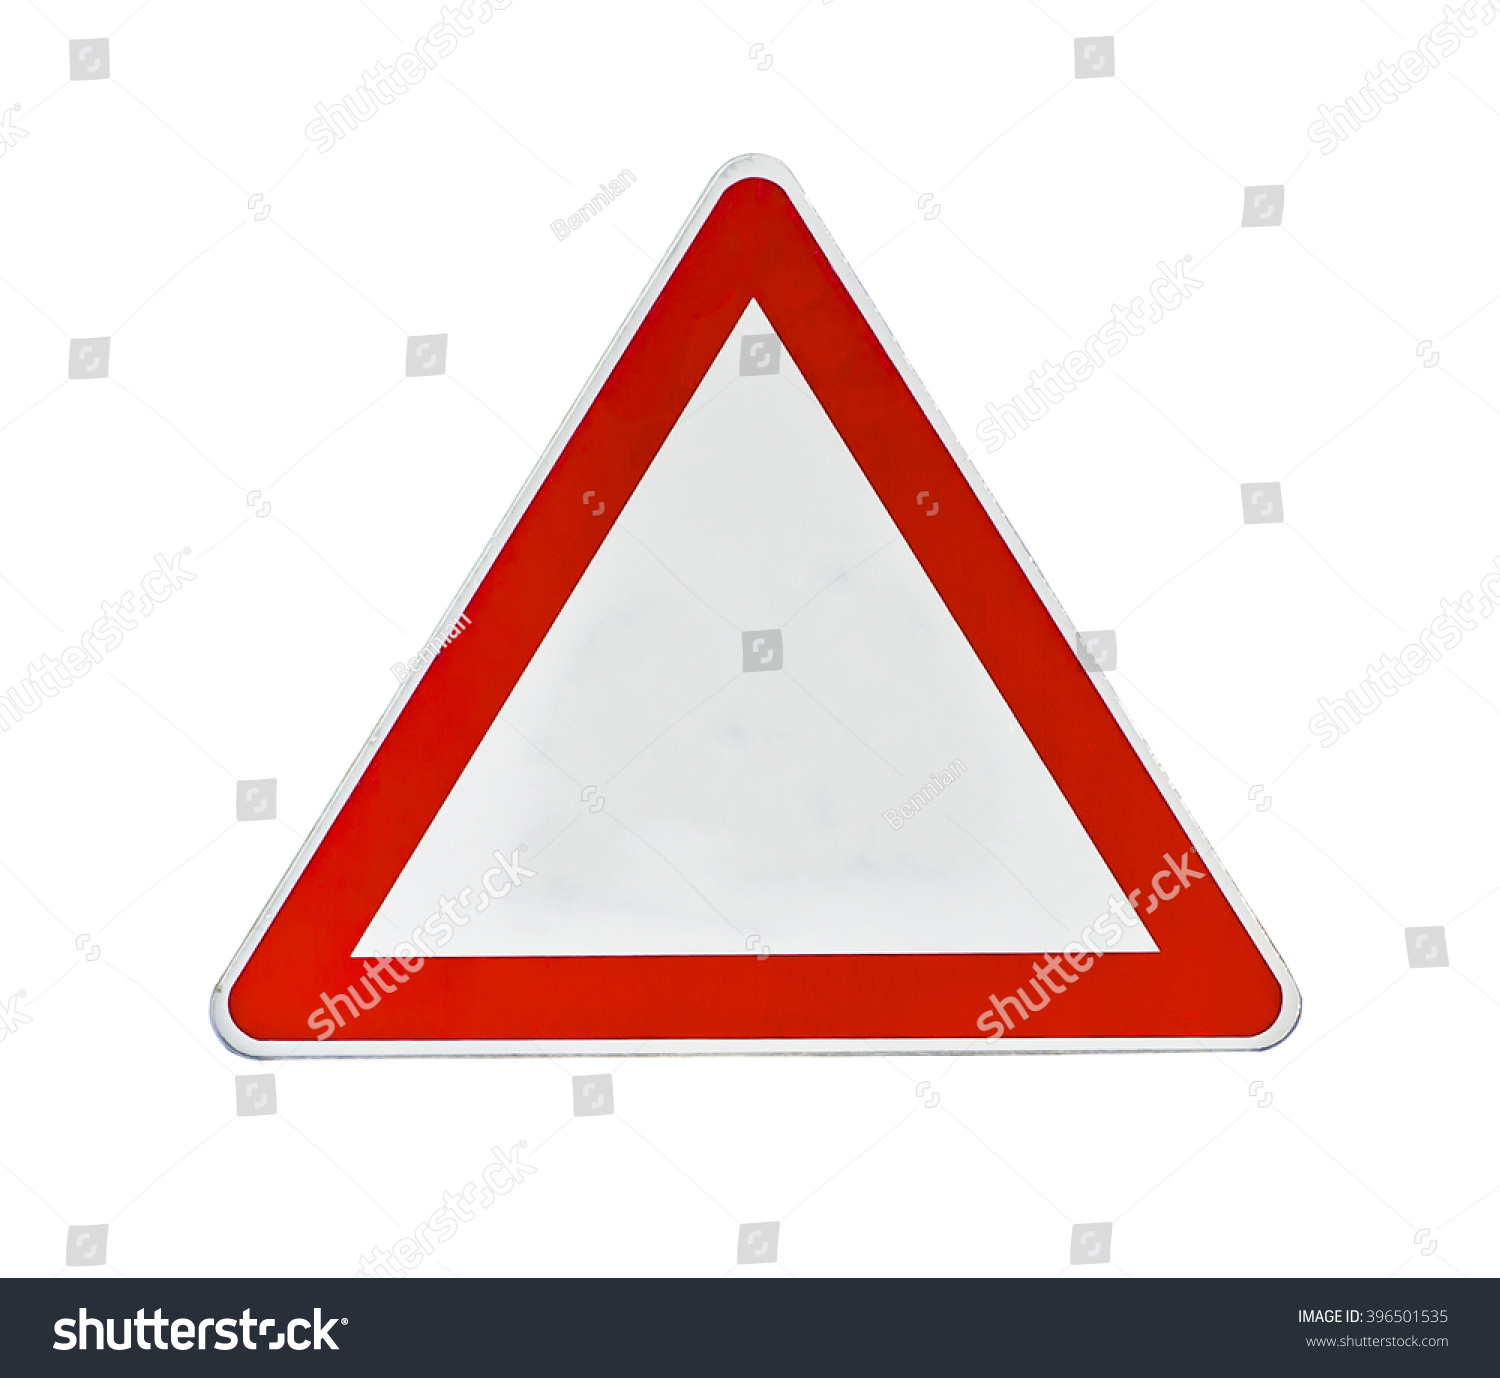 Red and white road traffic coordination symbol on white #396501535